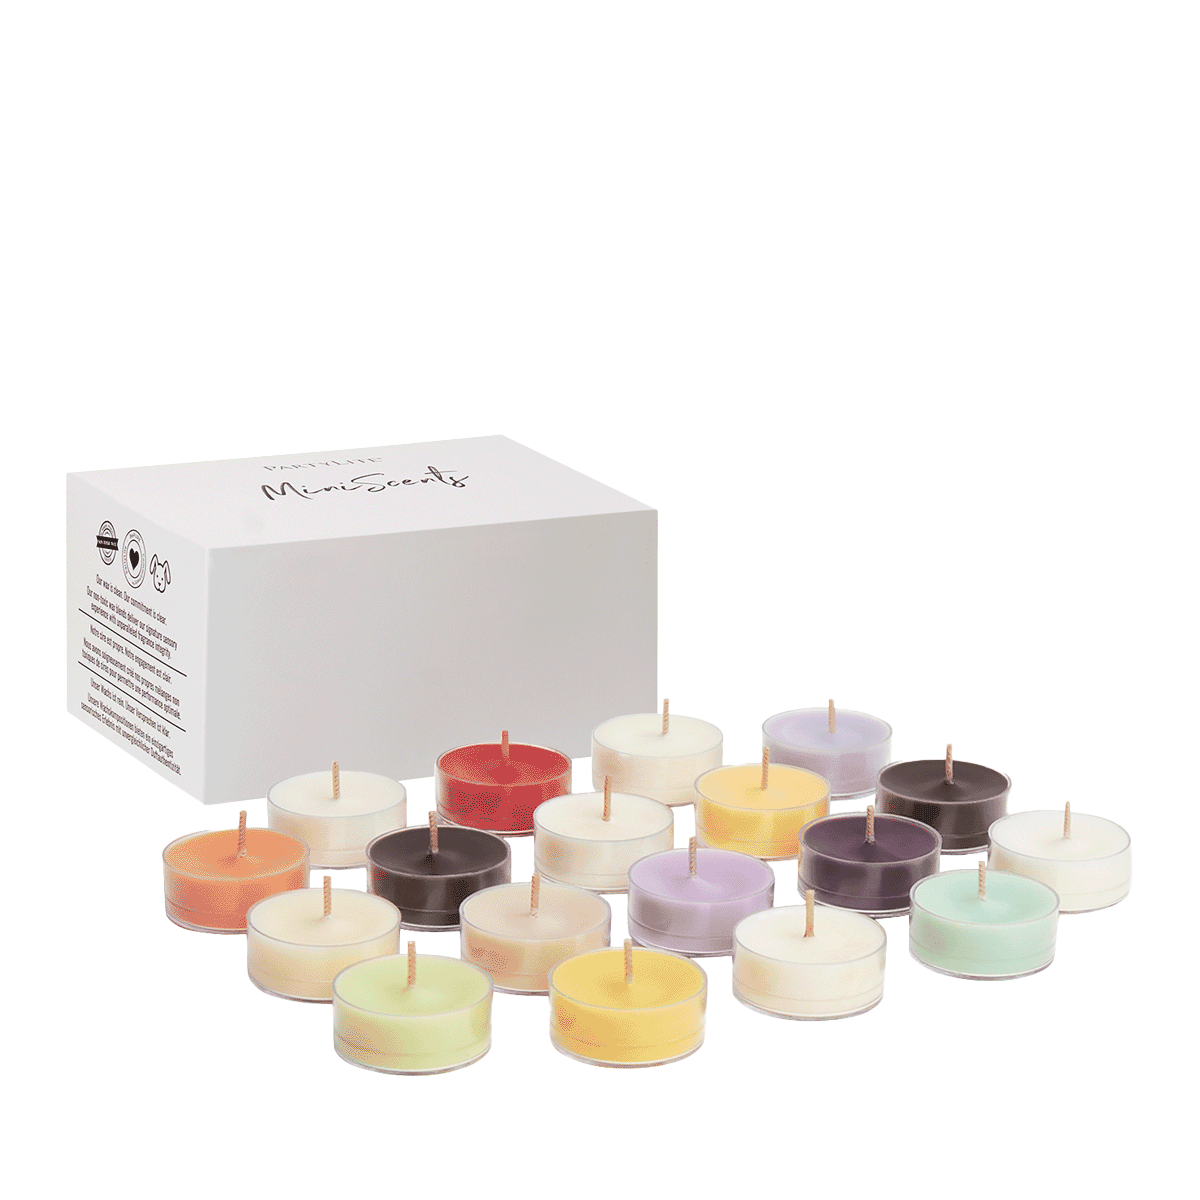 Sub-Brand 18-Piece Tealight Candles Sampler - PartyLite US